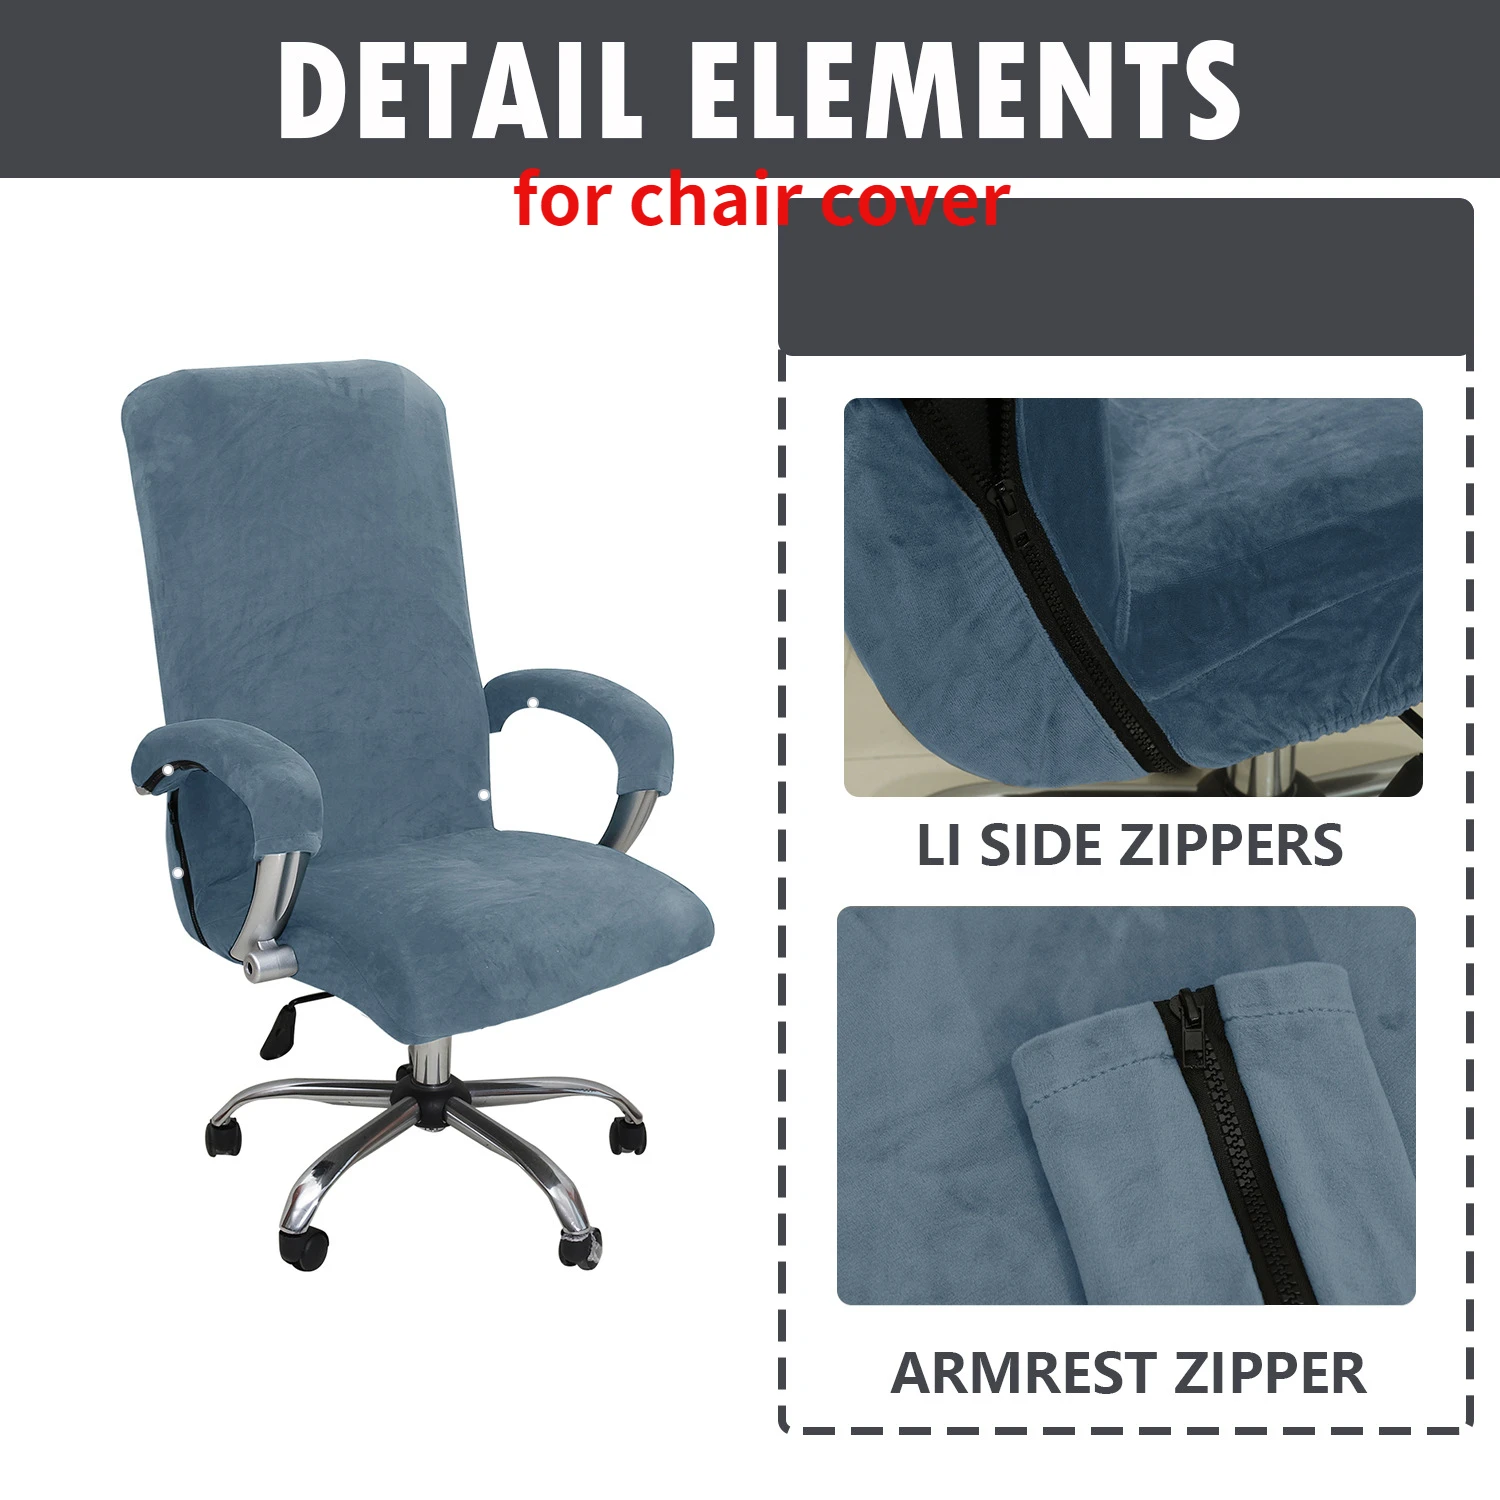 Thickened office chair cover computer swivel chair cover armrest cover 